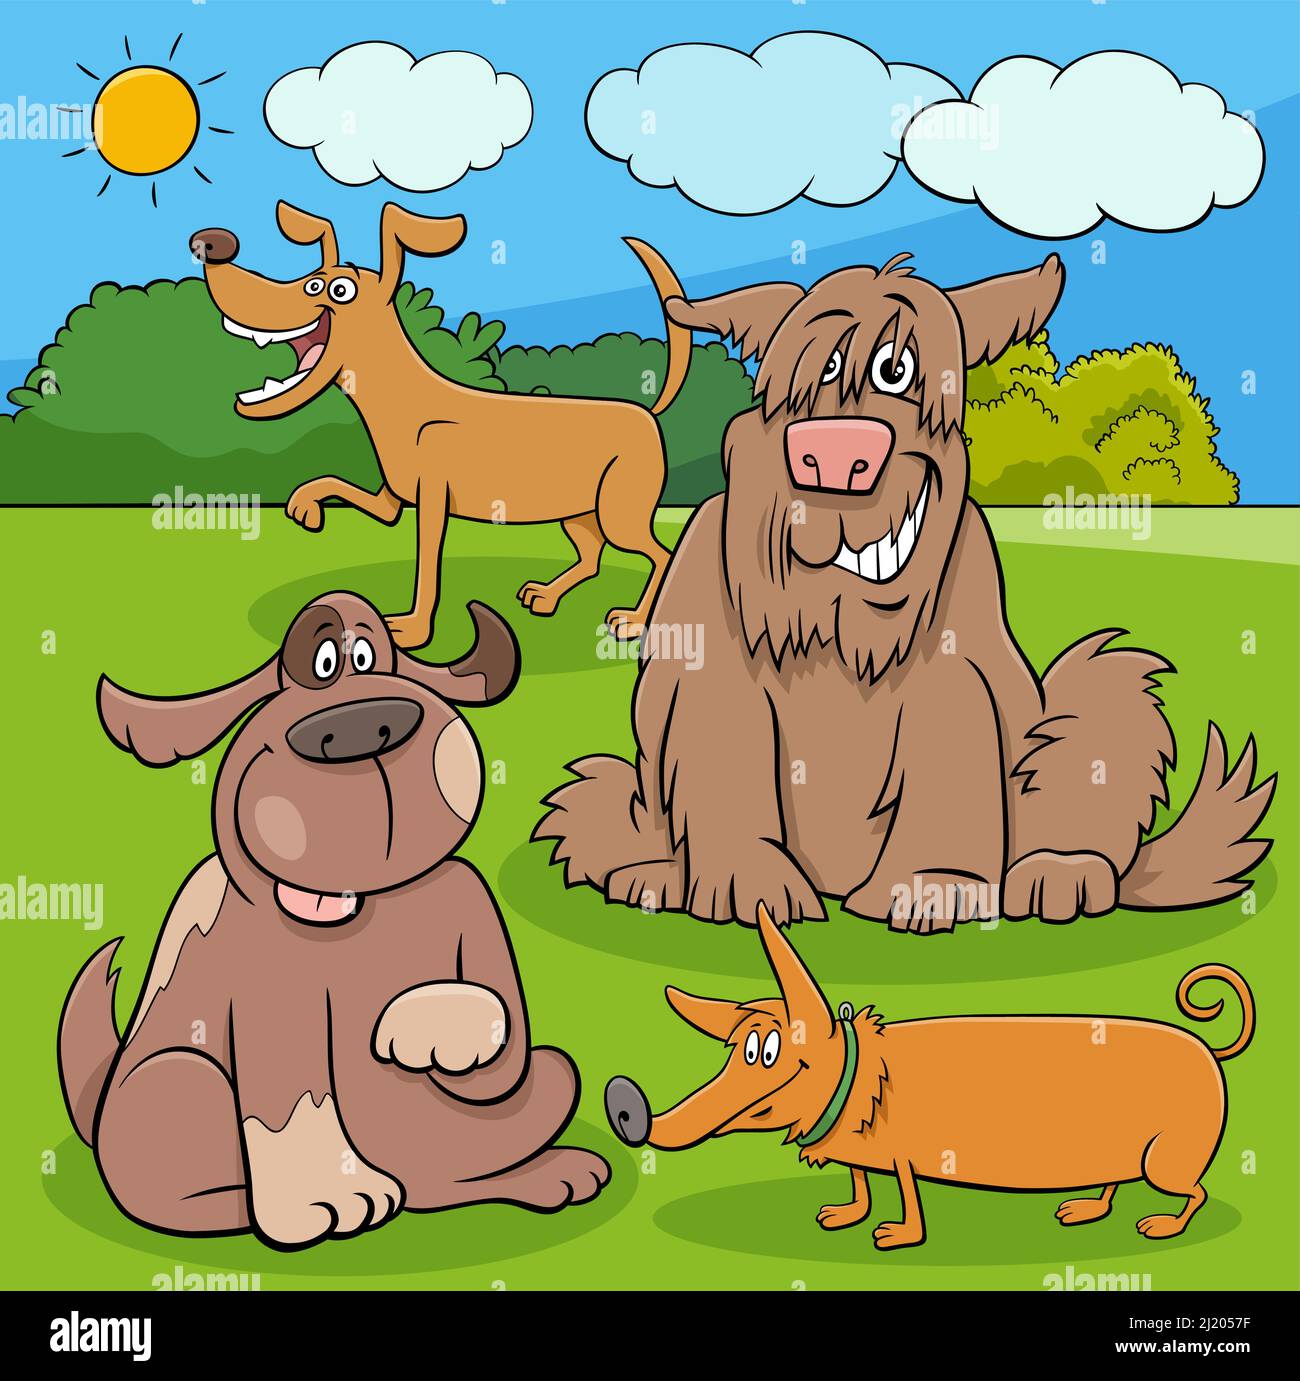 Cartoon illustration of funny playful dogs animal characters in the park Stock Vector